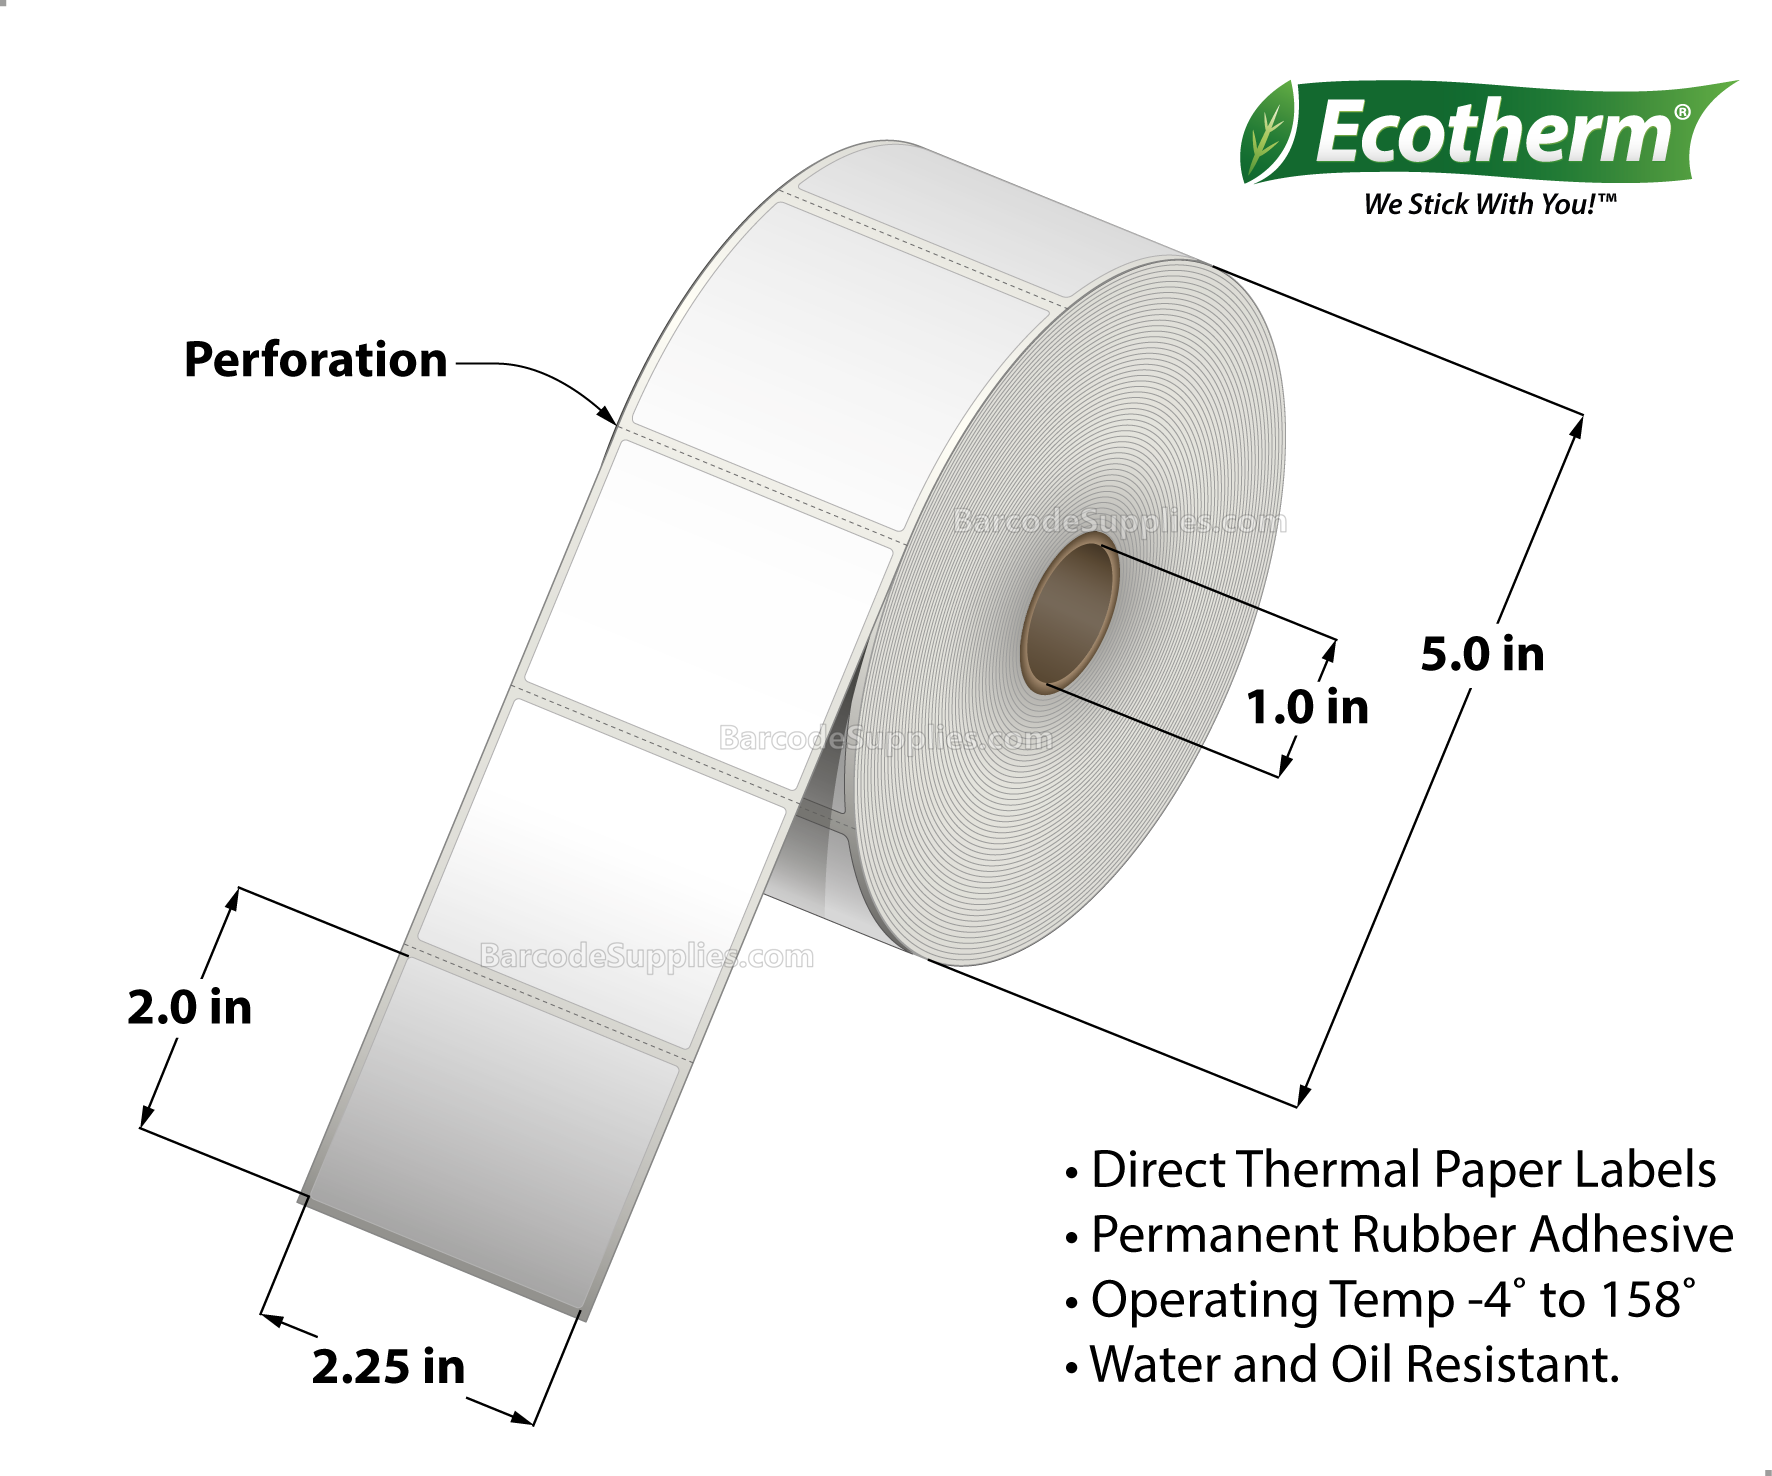 2.25 x 2 Direct Thermal White Labels With Rubber Adhesive - Perforated - 1370 Labels Per Roll - Carton Of 6 Rolls - 8220 Labels Total - MPN: ECOTHERM15128-6